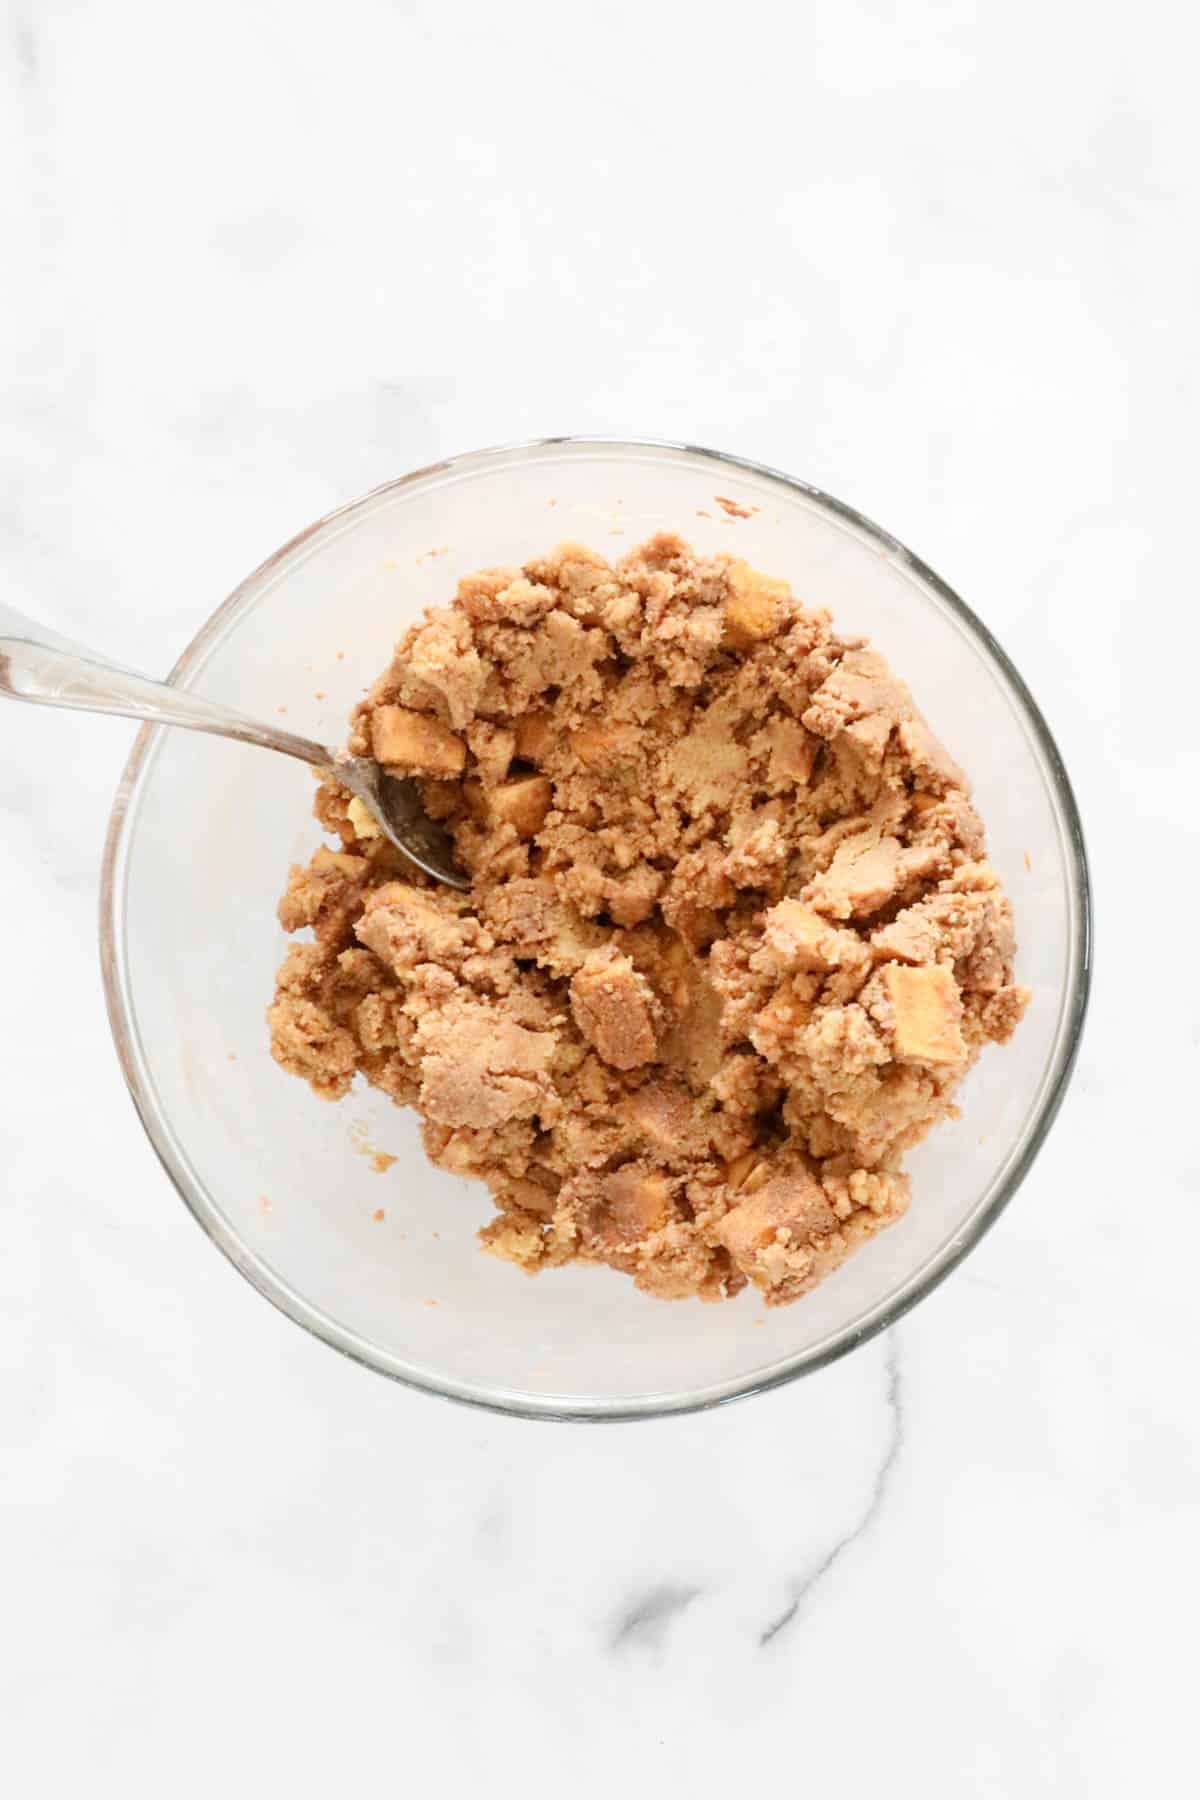 The crushed biscuit base mix with chunks of honeycomb mixed through.